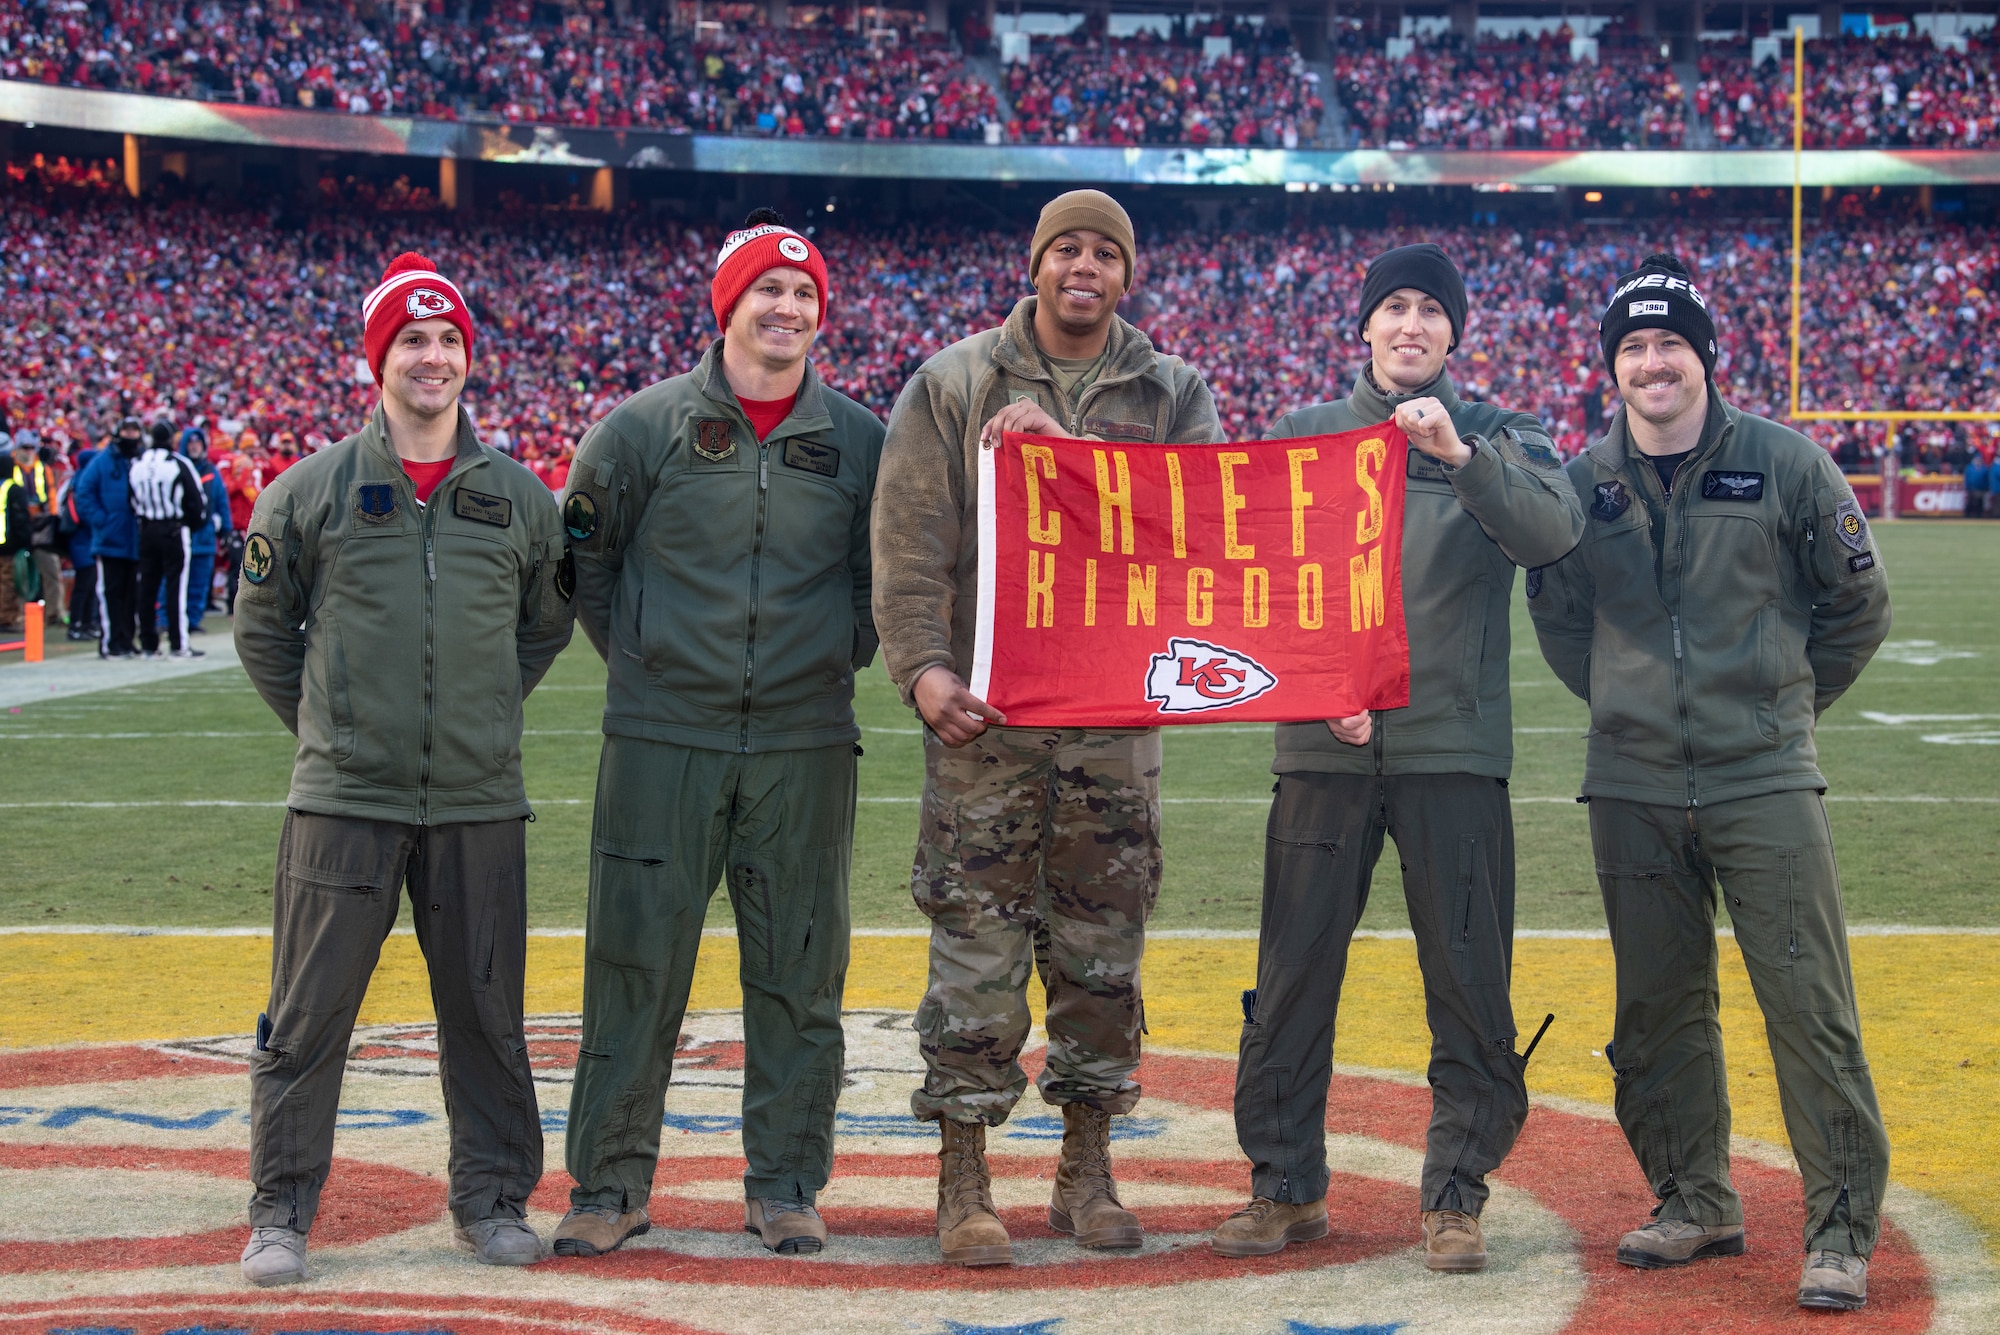 The Kansas City Chiefs recognize Airmen assigned to the 509th Bomb Wing and the 131st Bomb Wing at Whiteman Air Force Base, Missouri, during the third quarter of the AFC Championship game on Jan. 19, 2020, at Arrowhead Stadium, Kansas City, Missouri. A B-2 Spirit Stealth Bomber from Whiteman AFB ﬂew over the stadium during the National Anthem performance. The Kansas City Chiefs and Whiteman AFB have been long standing partners and work on a variety of events throughout the year to strengthen bonds between the local community and the military. (U.S. Air Force photo by Senior Airman Thomas Barley)